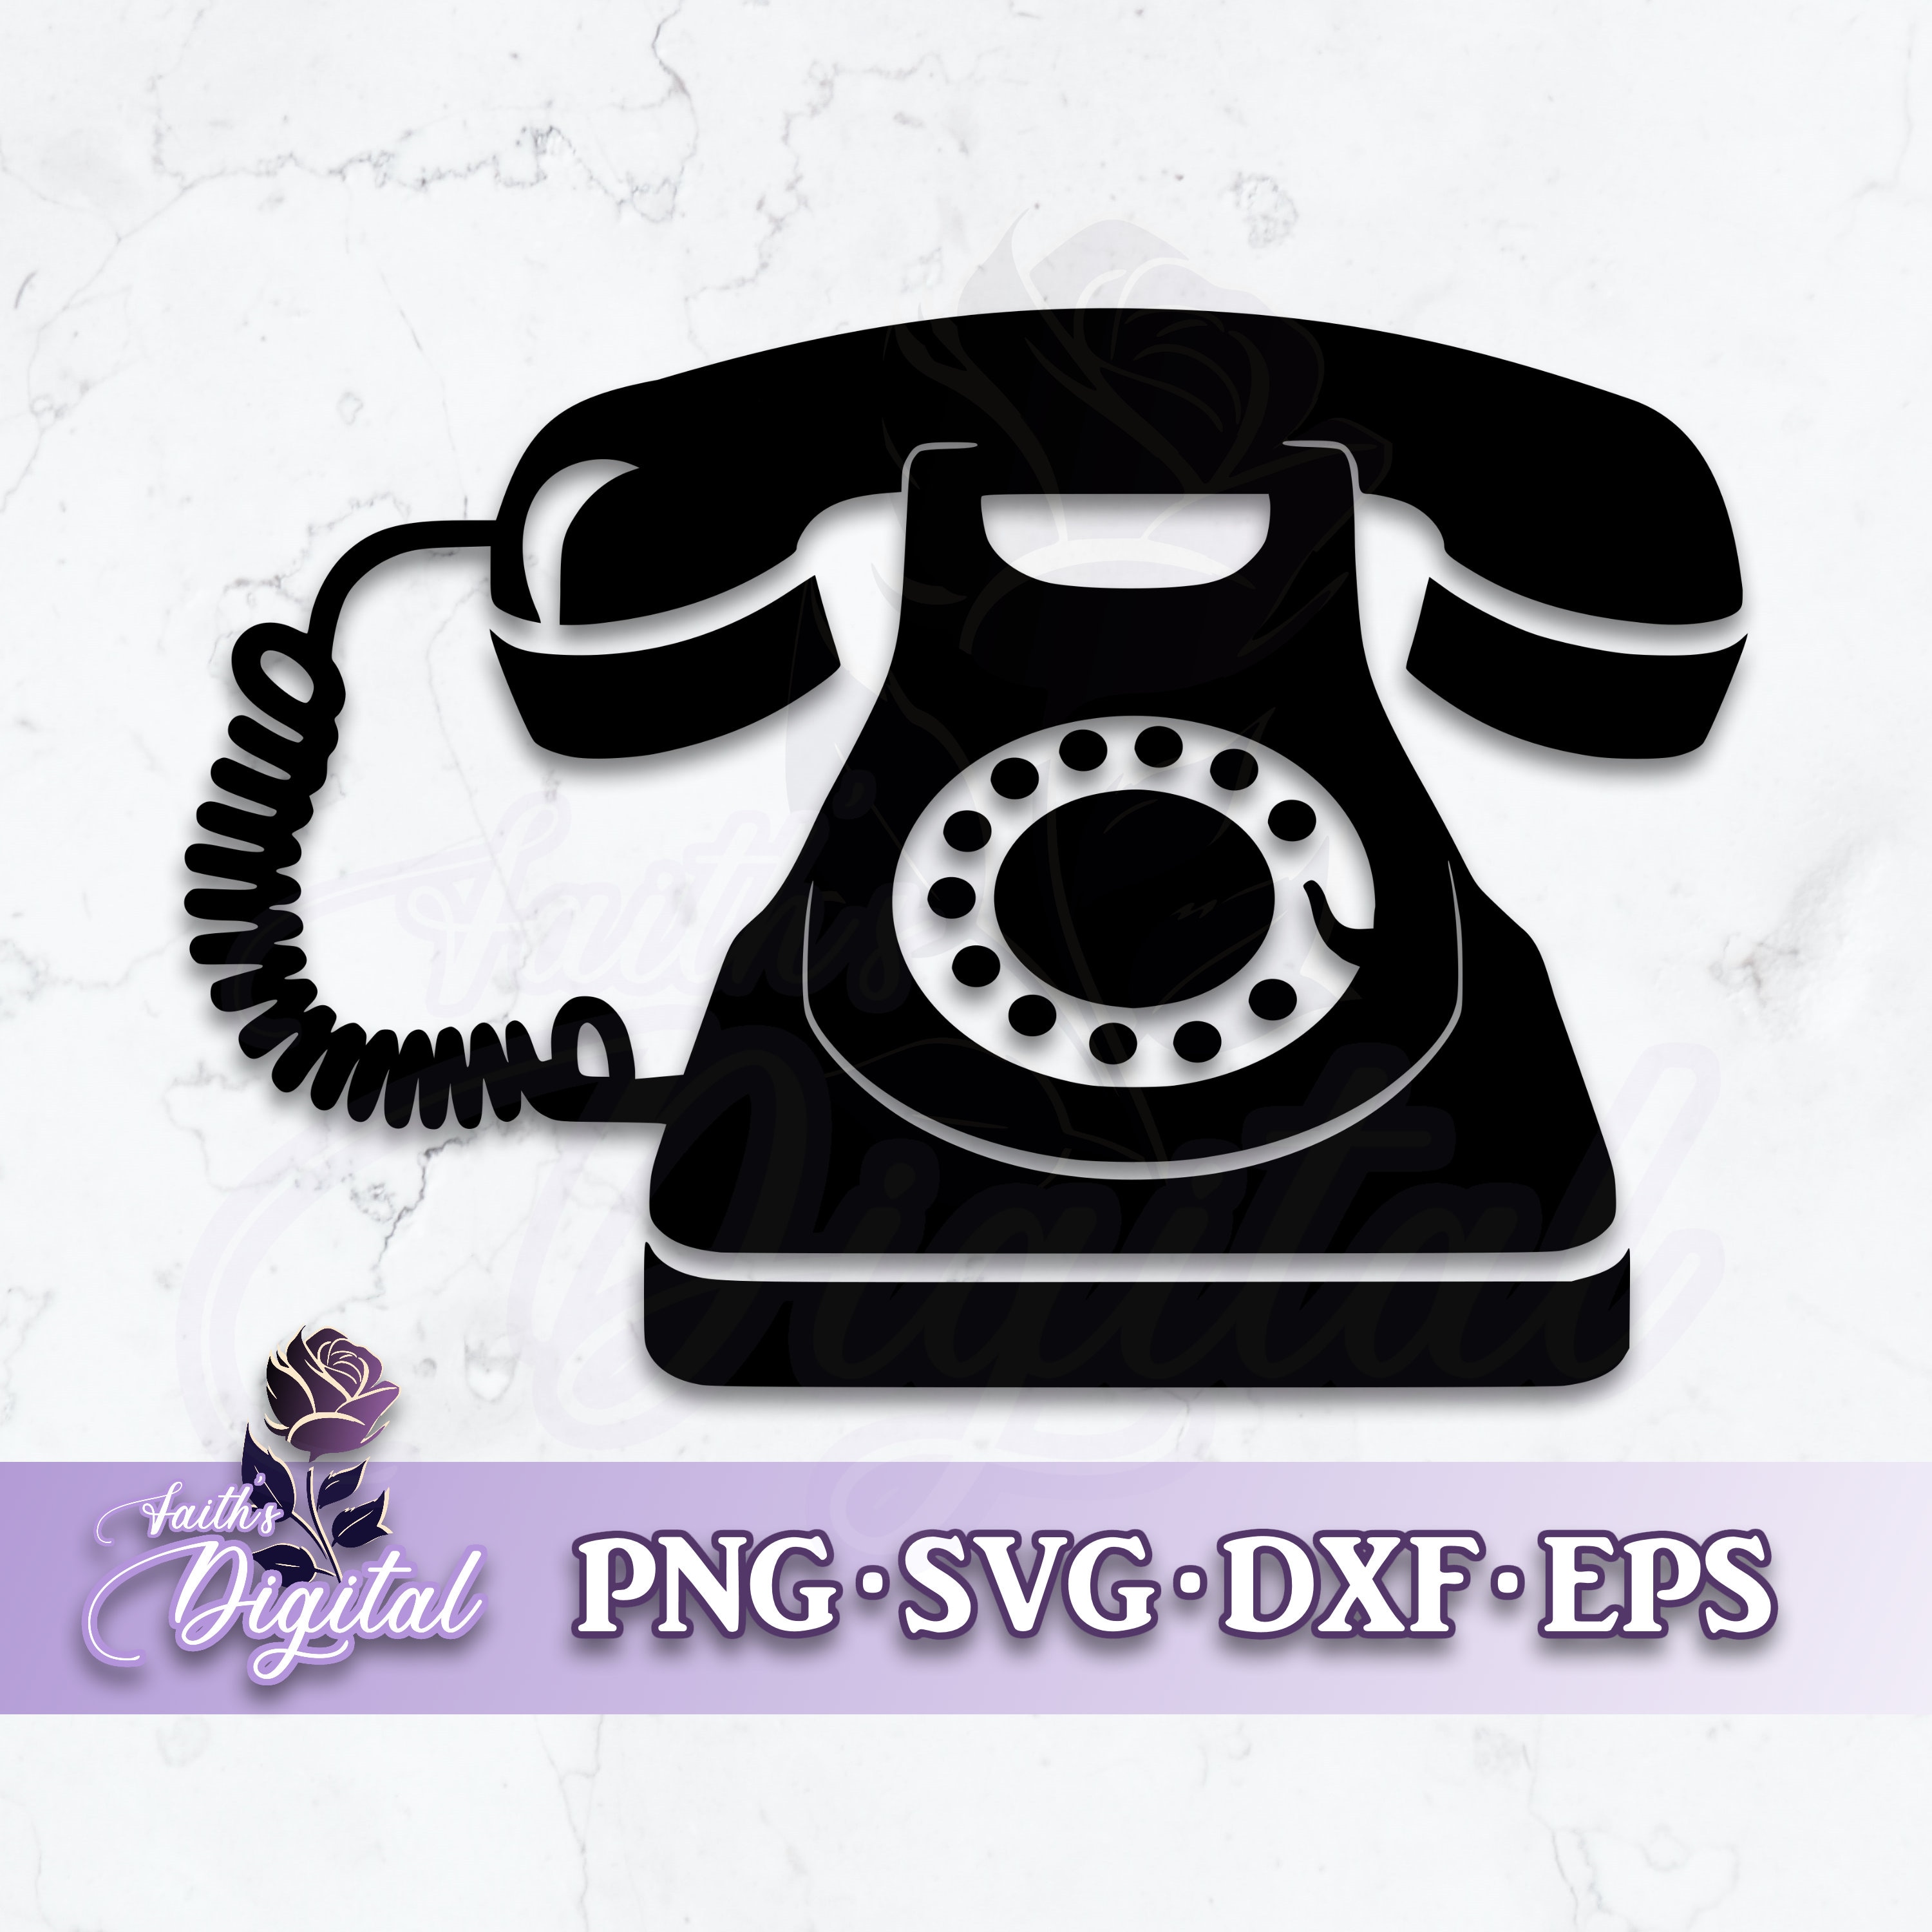 telephone telephone vintage retro classic png download - 4096*4096